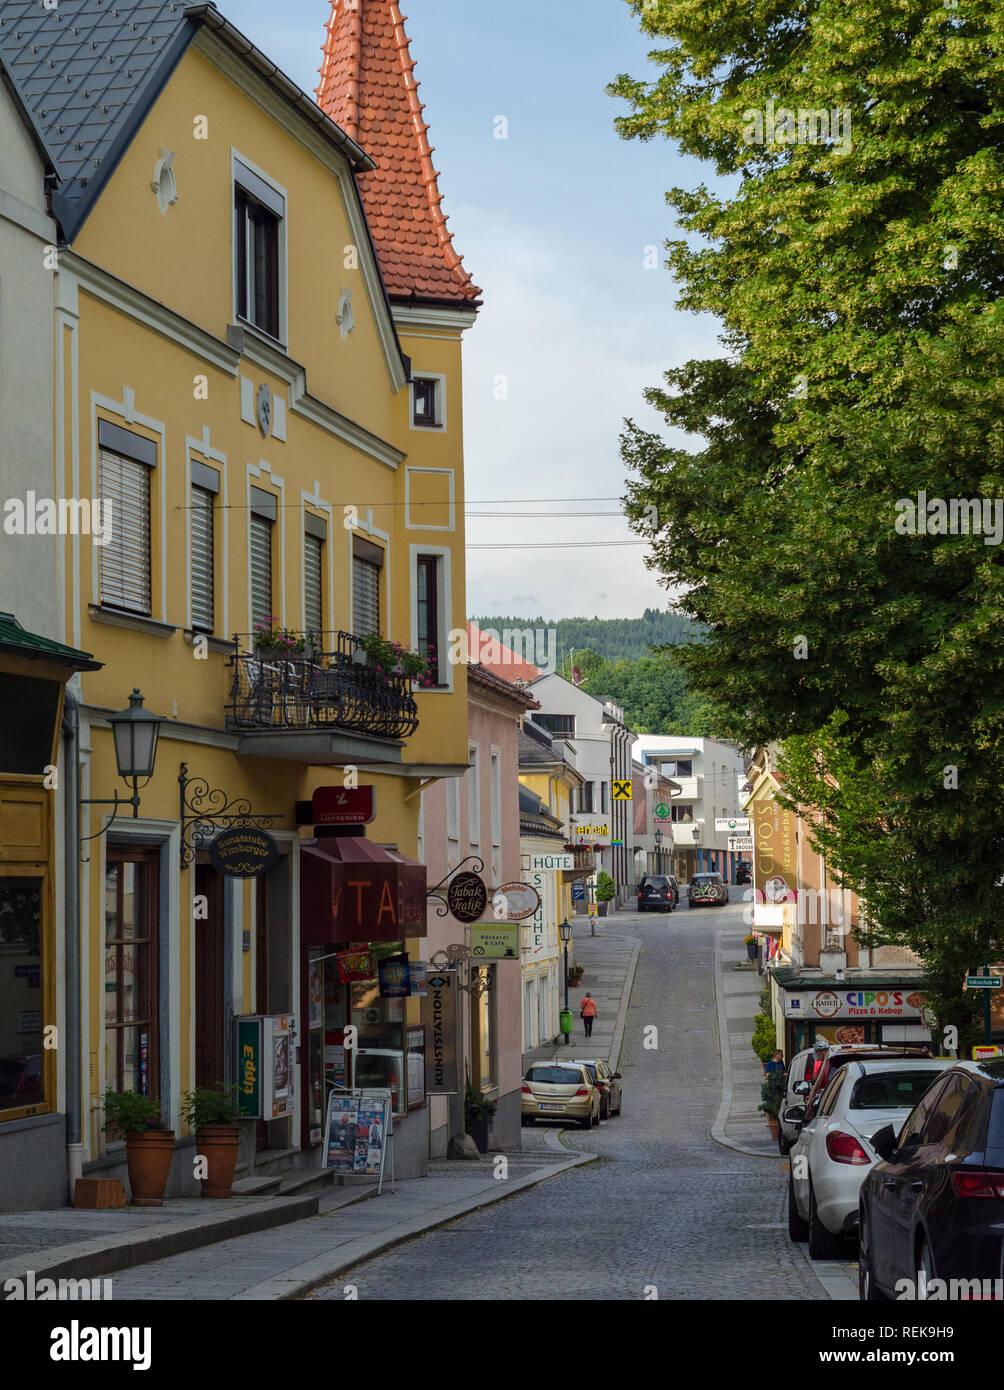 The picturesque town of Grein, Austria. Stock Photo